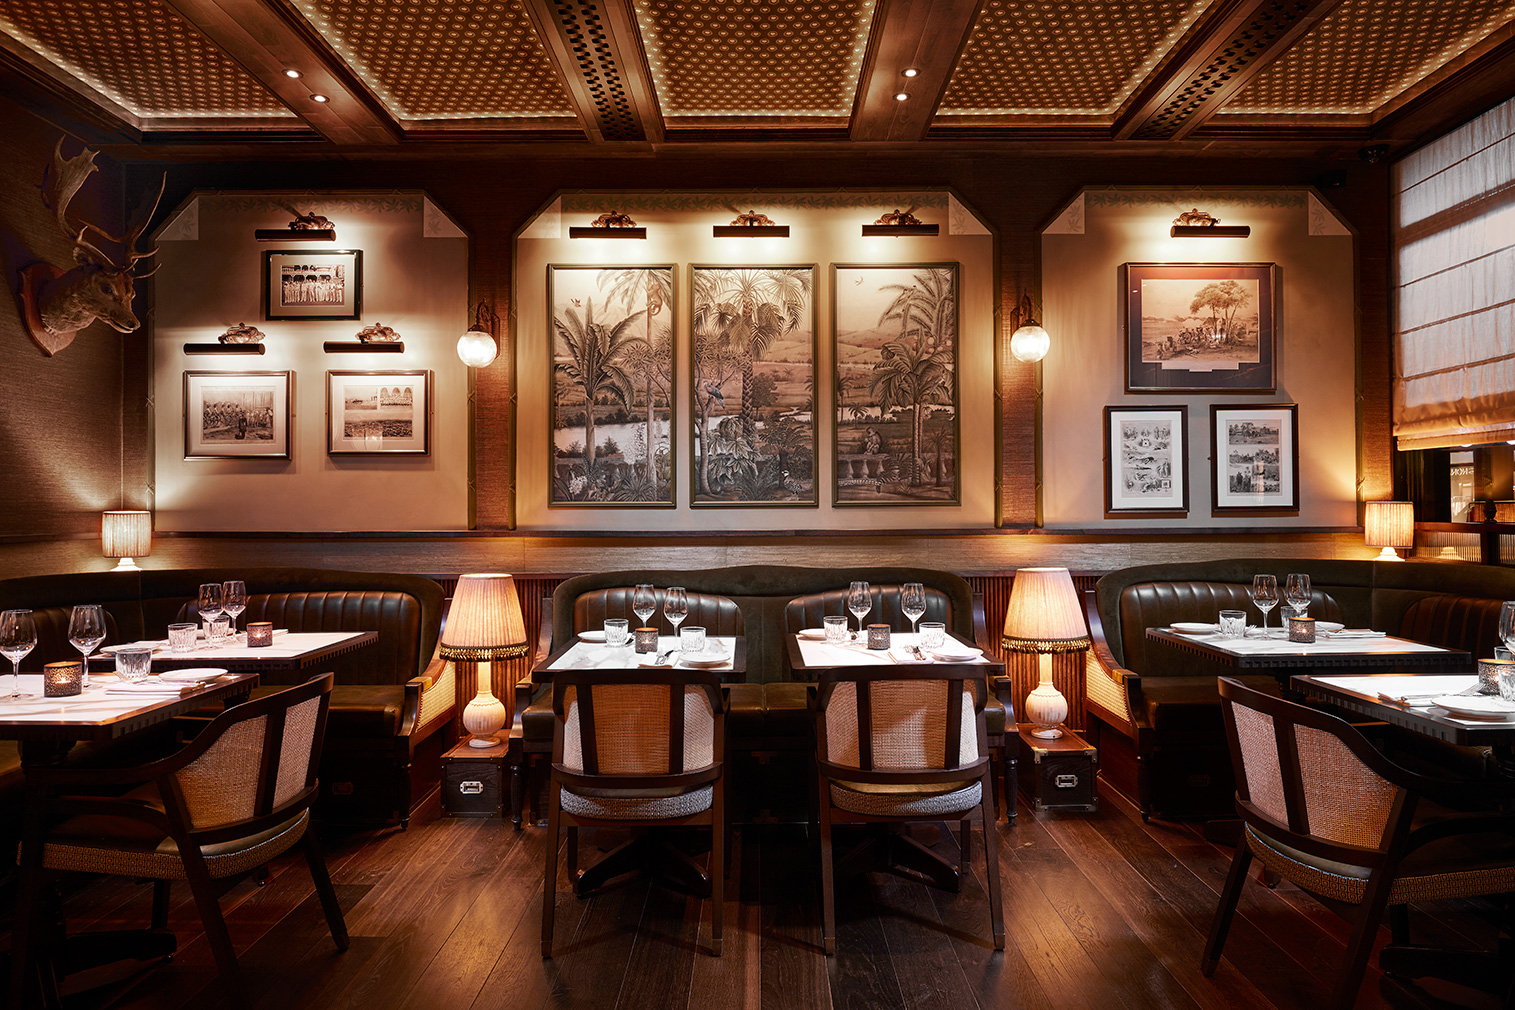 London restaurant Gymkhana harks back to the days of India’s high society clubs